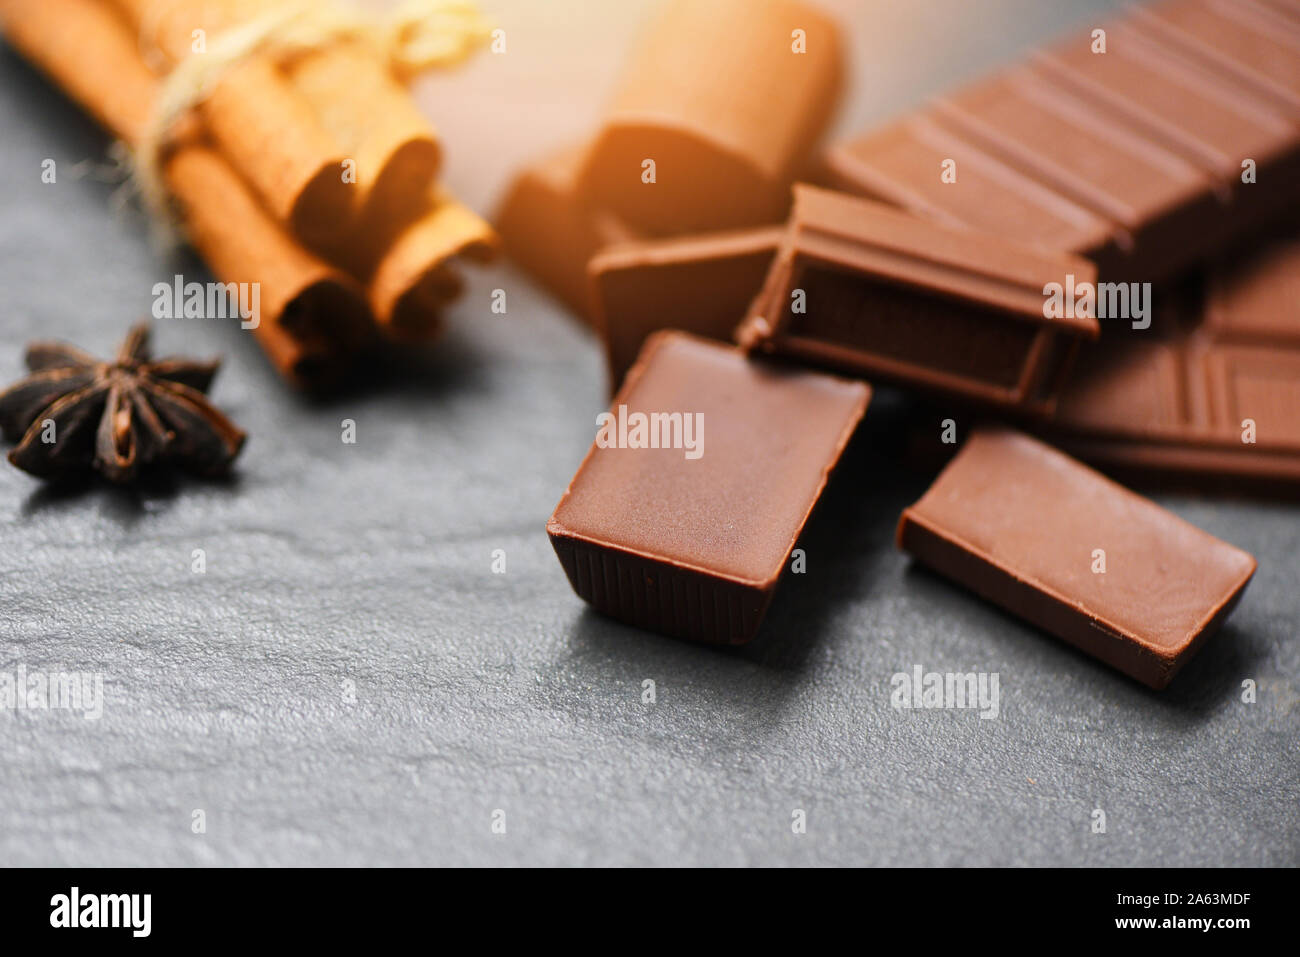 Chocolate Bar And Spice On Dark Background Sweet Dessert For Snack Selective Focus Stock Photo